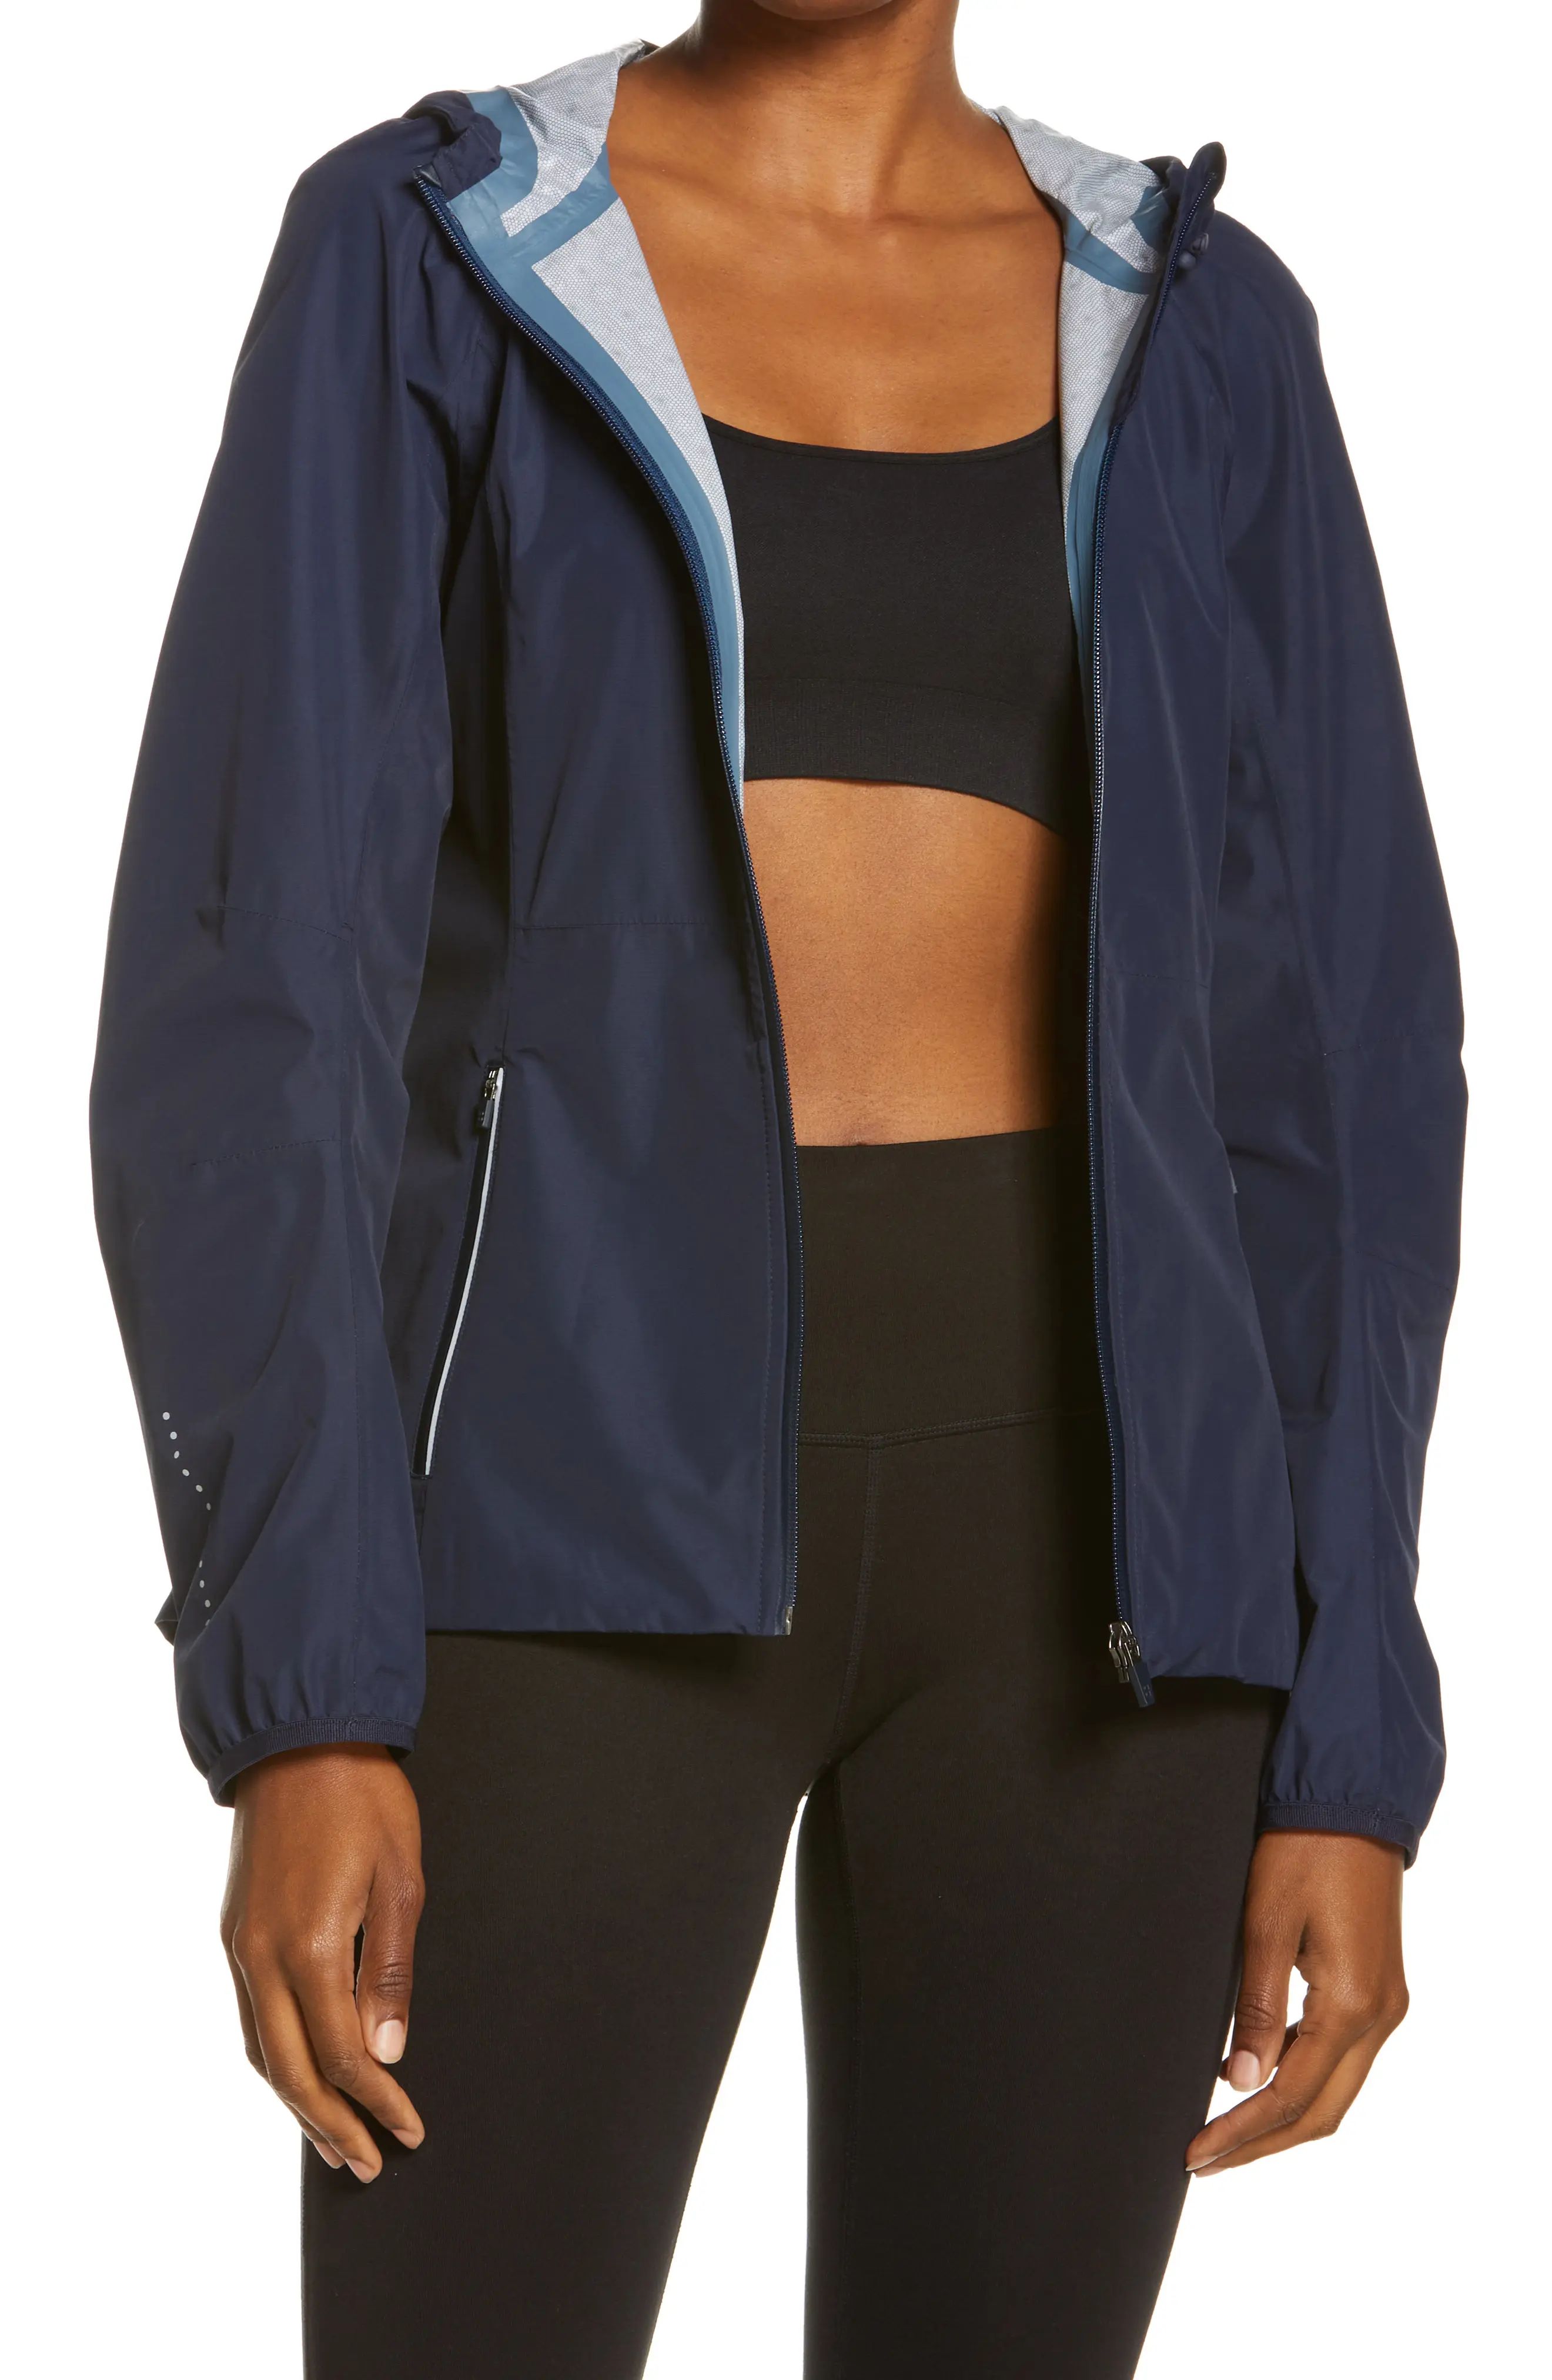 Sweaty Betty Commuter Cycling Jacket, Size Medium in Navy Blue at Nordstrom | Nordstrom